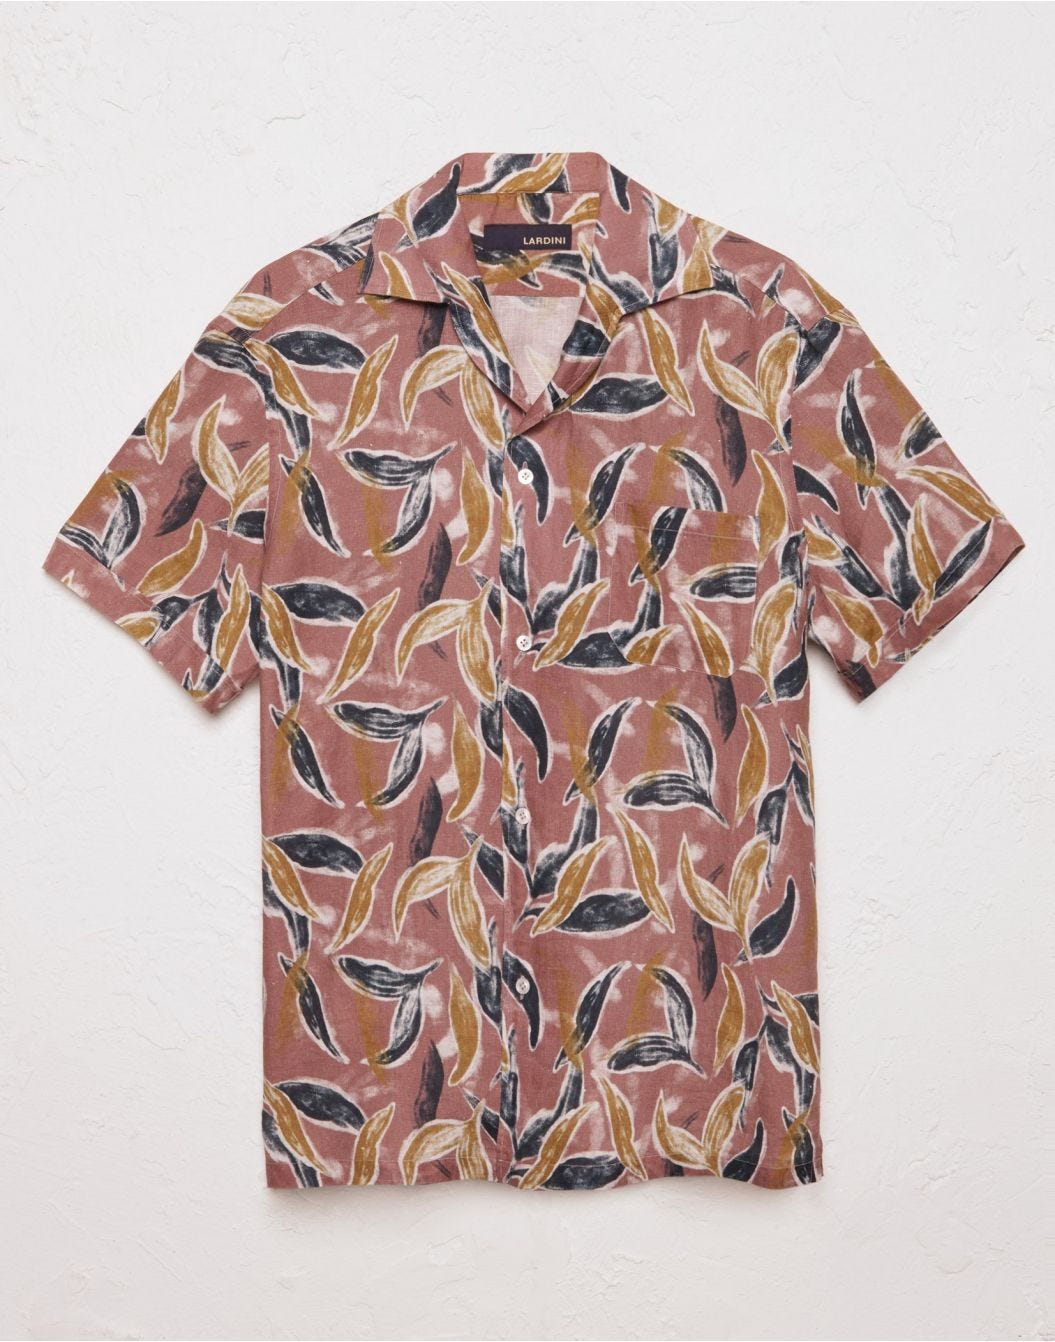 Pink research shirt with leaves print